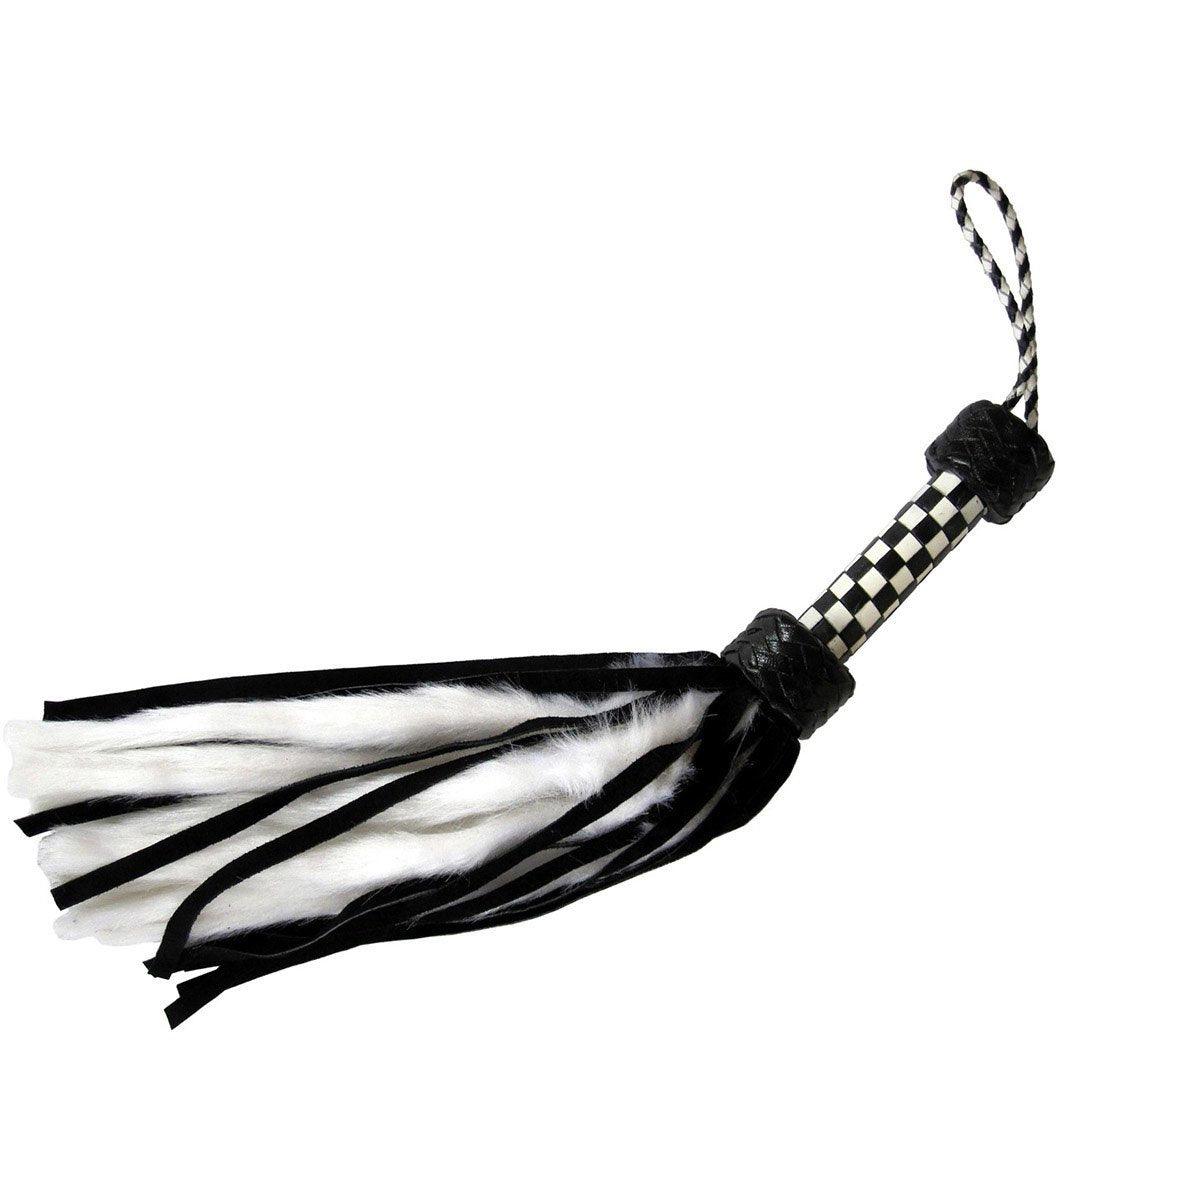 Suede and Fluff MINI Flogger - 18" - White-Black - shop enby